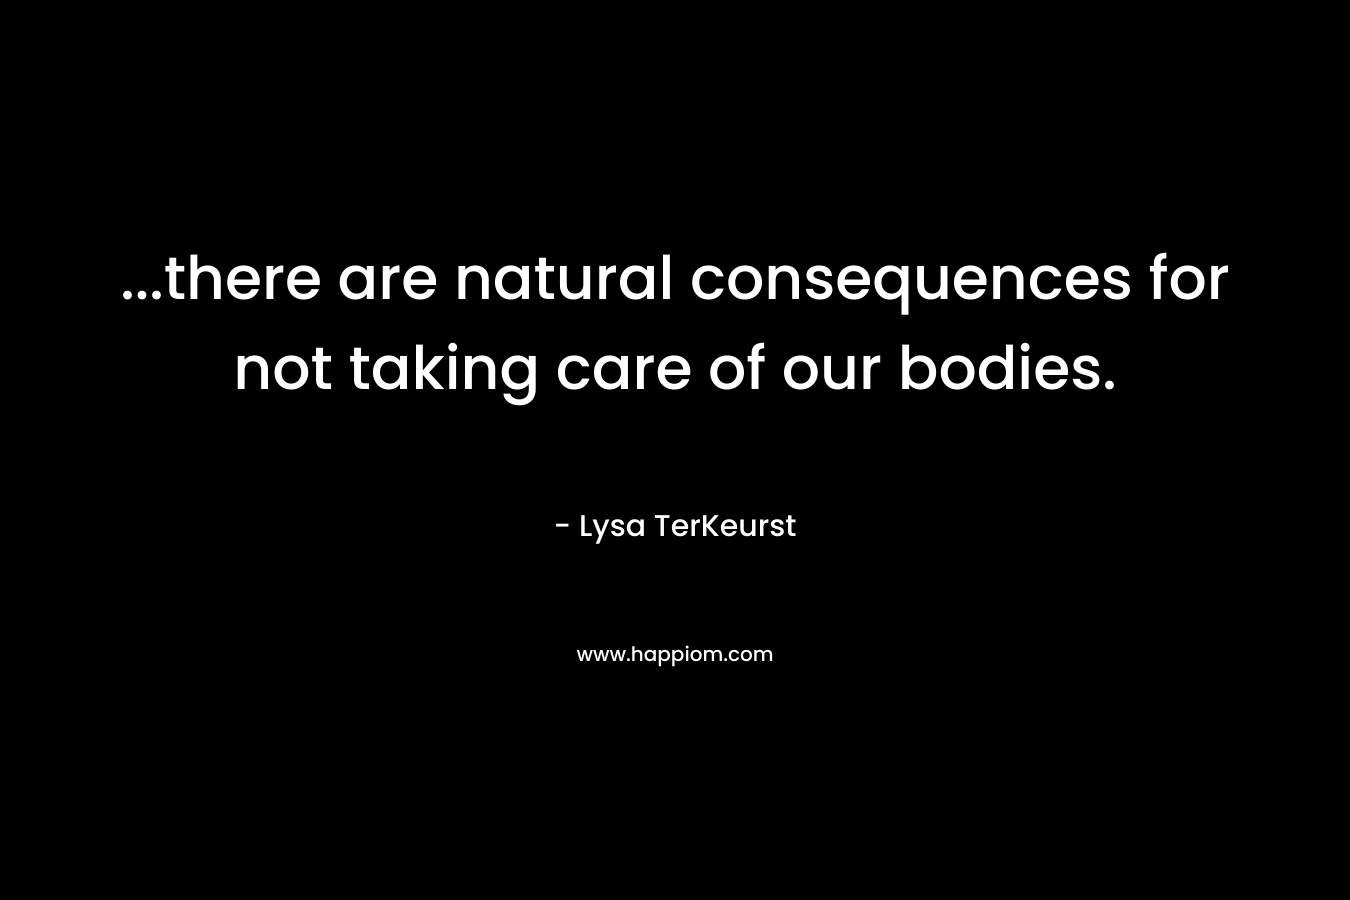 ...there are natural consequences for not taking care of our bodies.